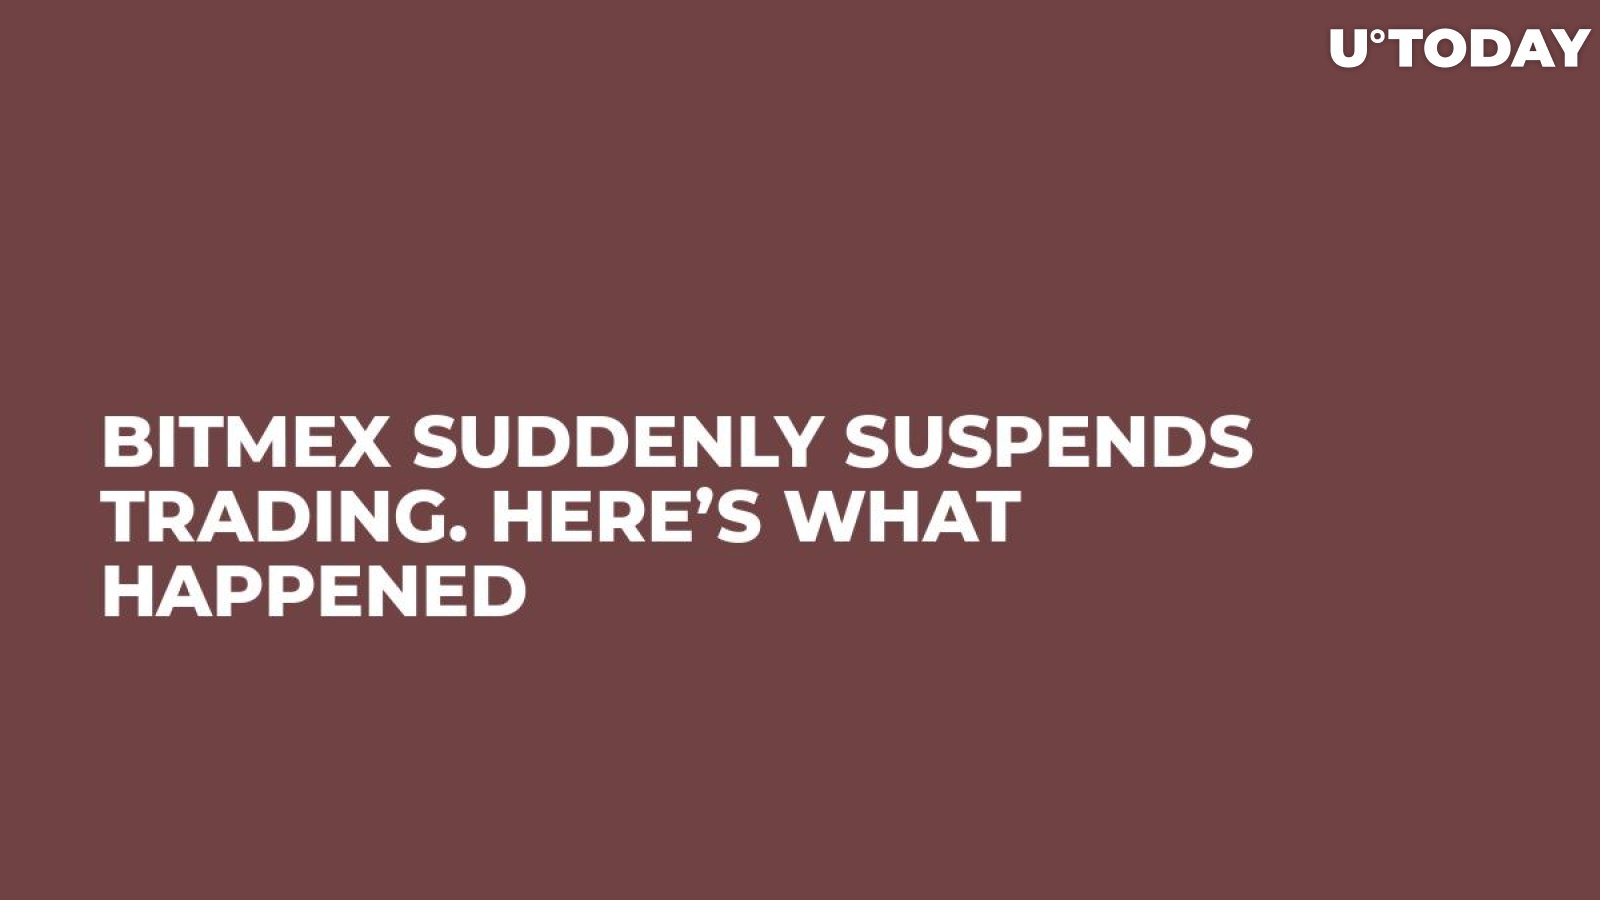 BitMEX Suddenly Suspends Trading. Here’s What Happened